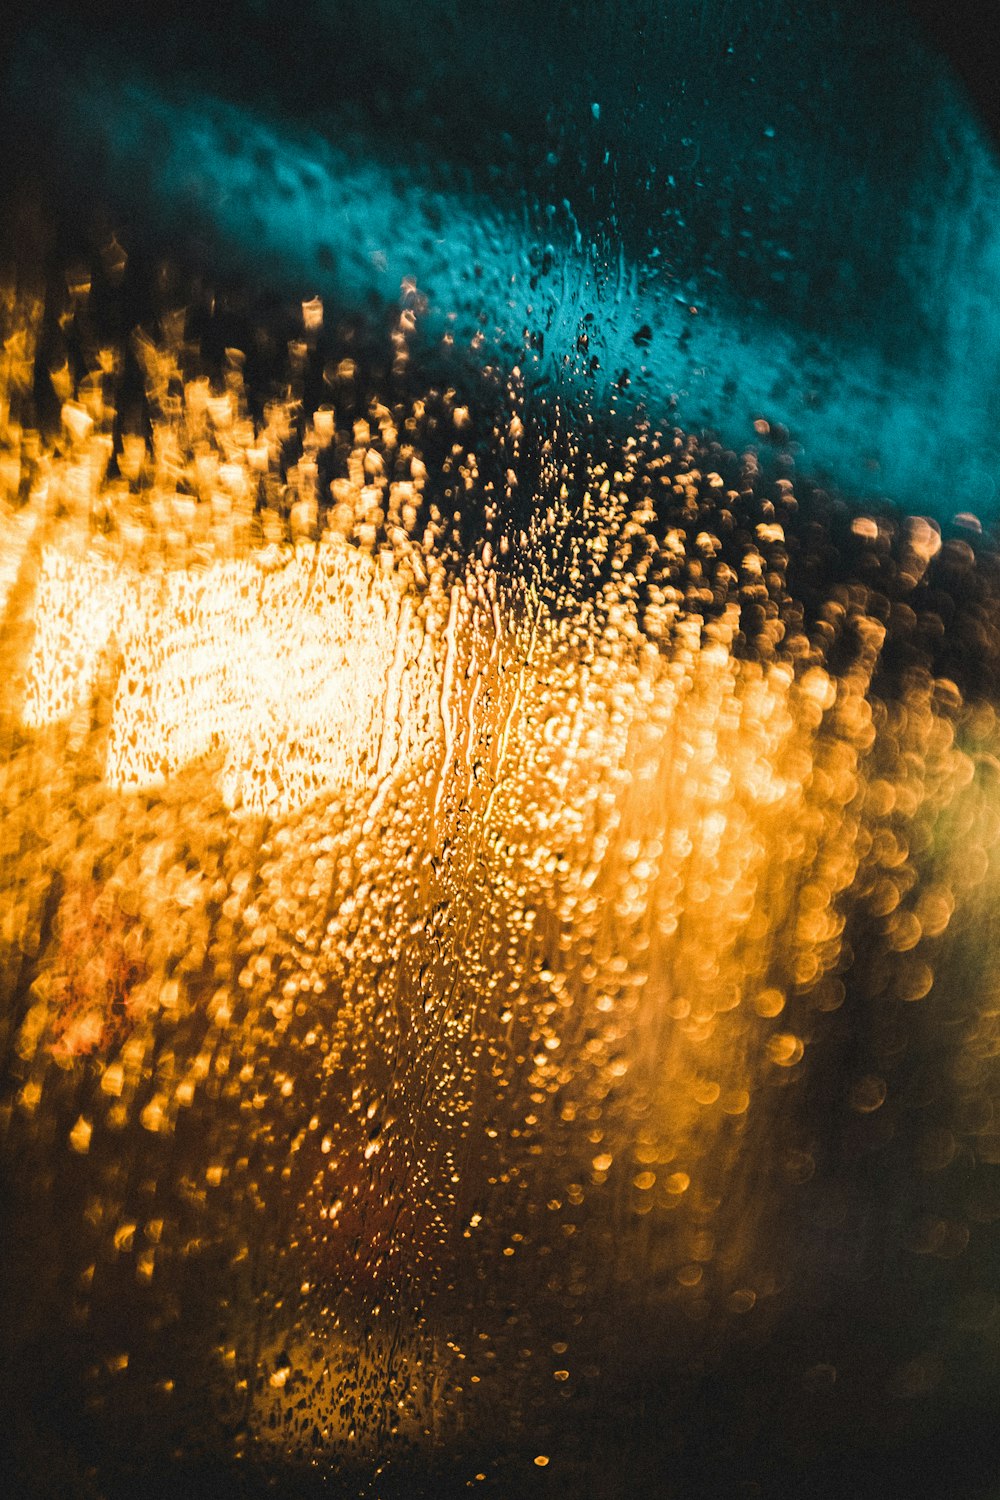 a close up of a rain covered window